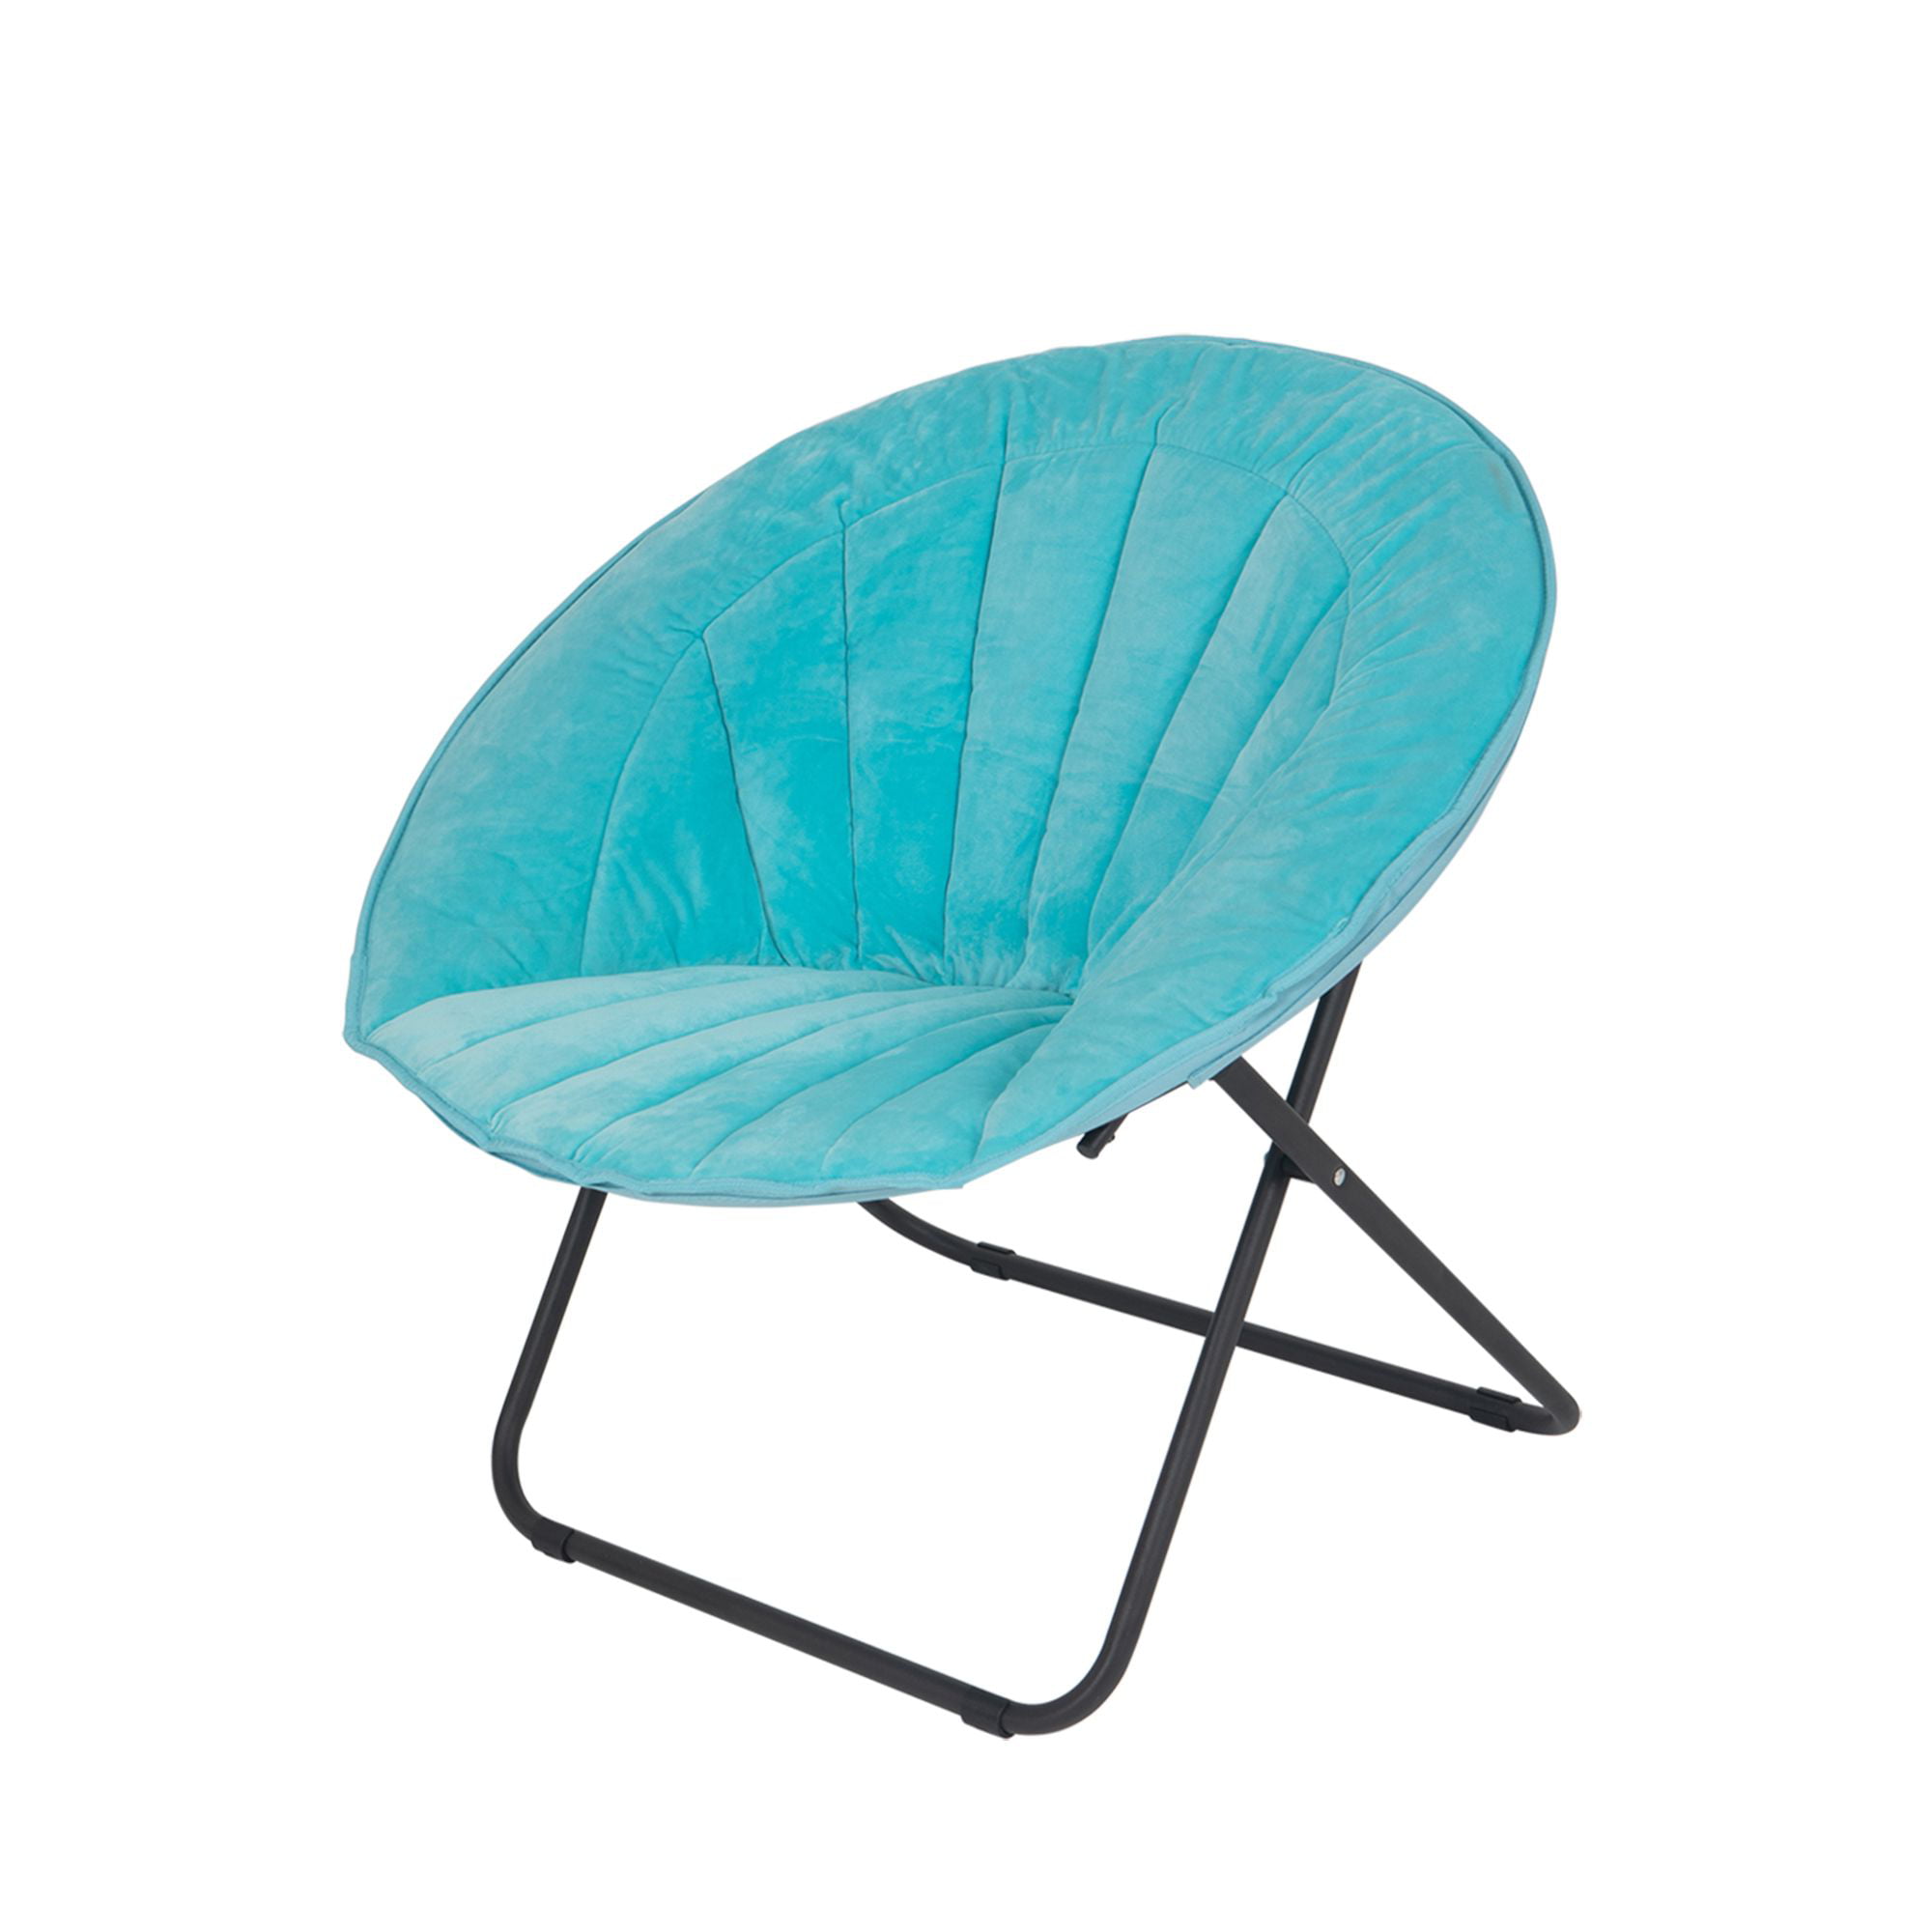 Mainstays Collapsible Velvet Seashell Saucer Chair (Teal), Faux Fur (Cheetah) $22, Black $30 & More + Free S&H w/ Walmart+ or $35+